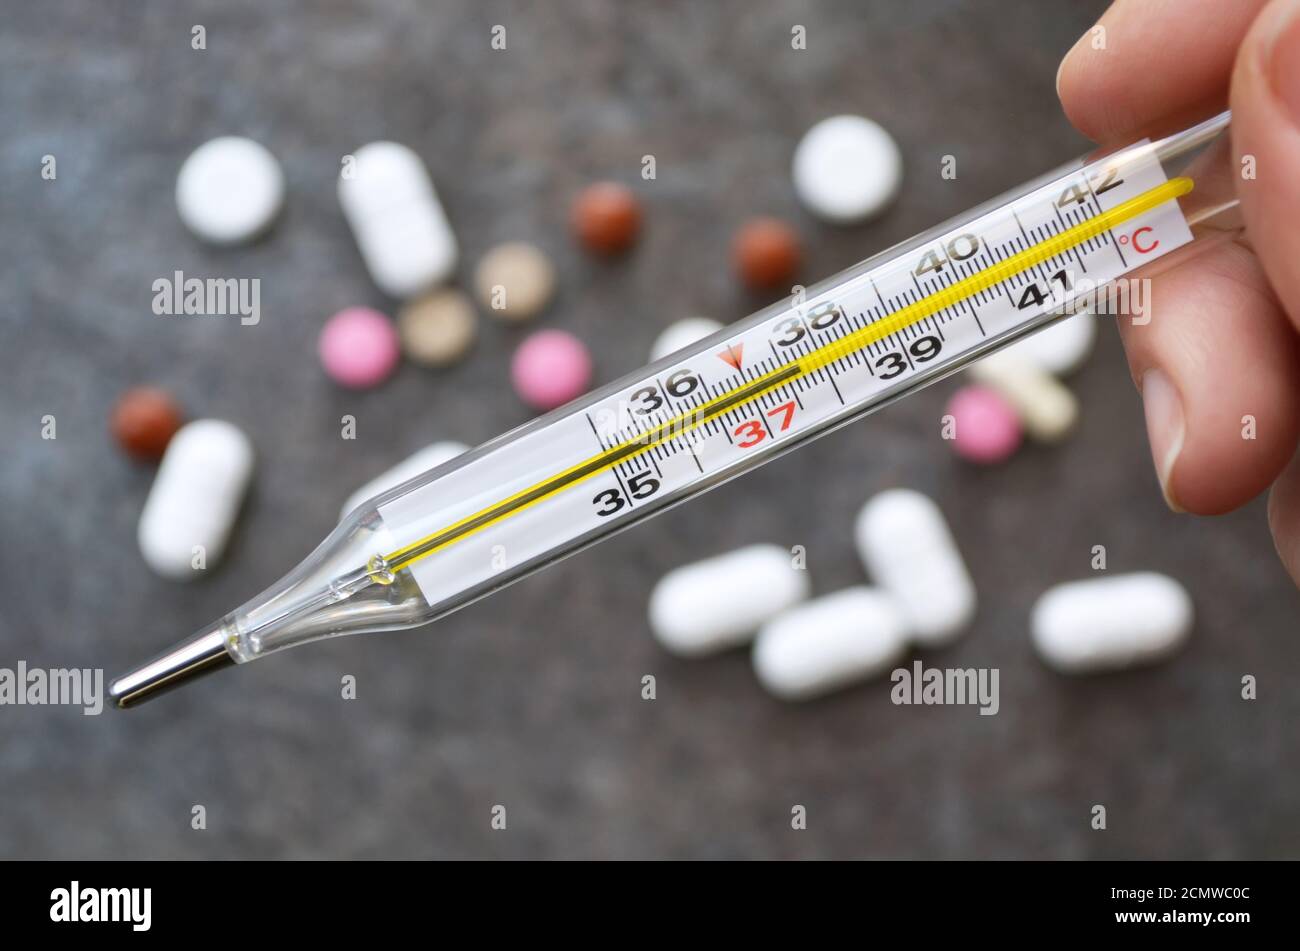 https://c8.alamy.com/comp/2CMWC0C/medical-thermometer-indicating-a-temperature-of-377-degrees-celsius-against-the-background-of-scattered-tablets-on-the-dark-gray-surface-of-the-table-2CMWC0C.jpg